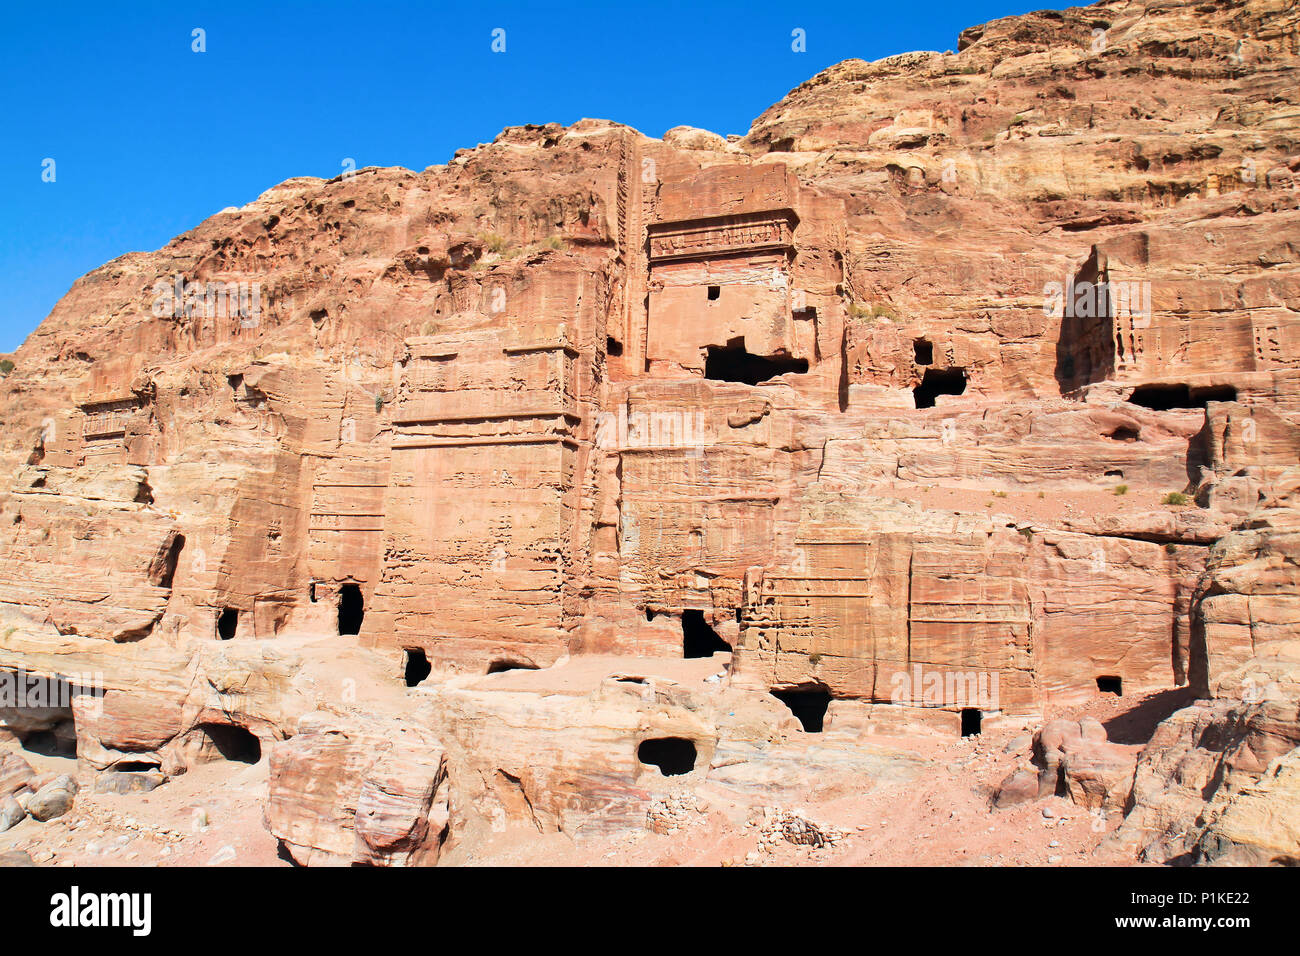 The ancient city of Petra in Jordan. It was carved out the rocks. It is now an UNESCO World Heritage Site. Jordan Stock Photo